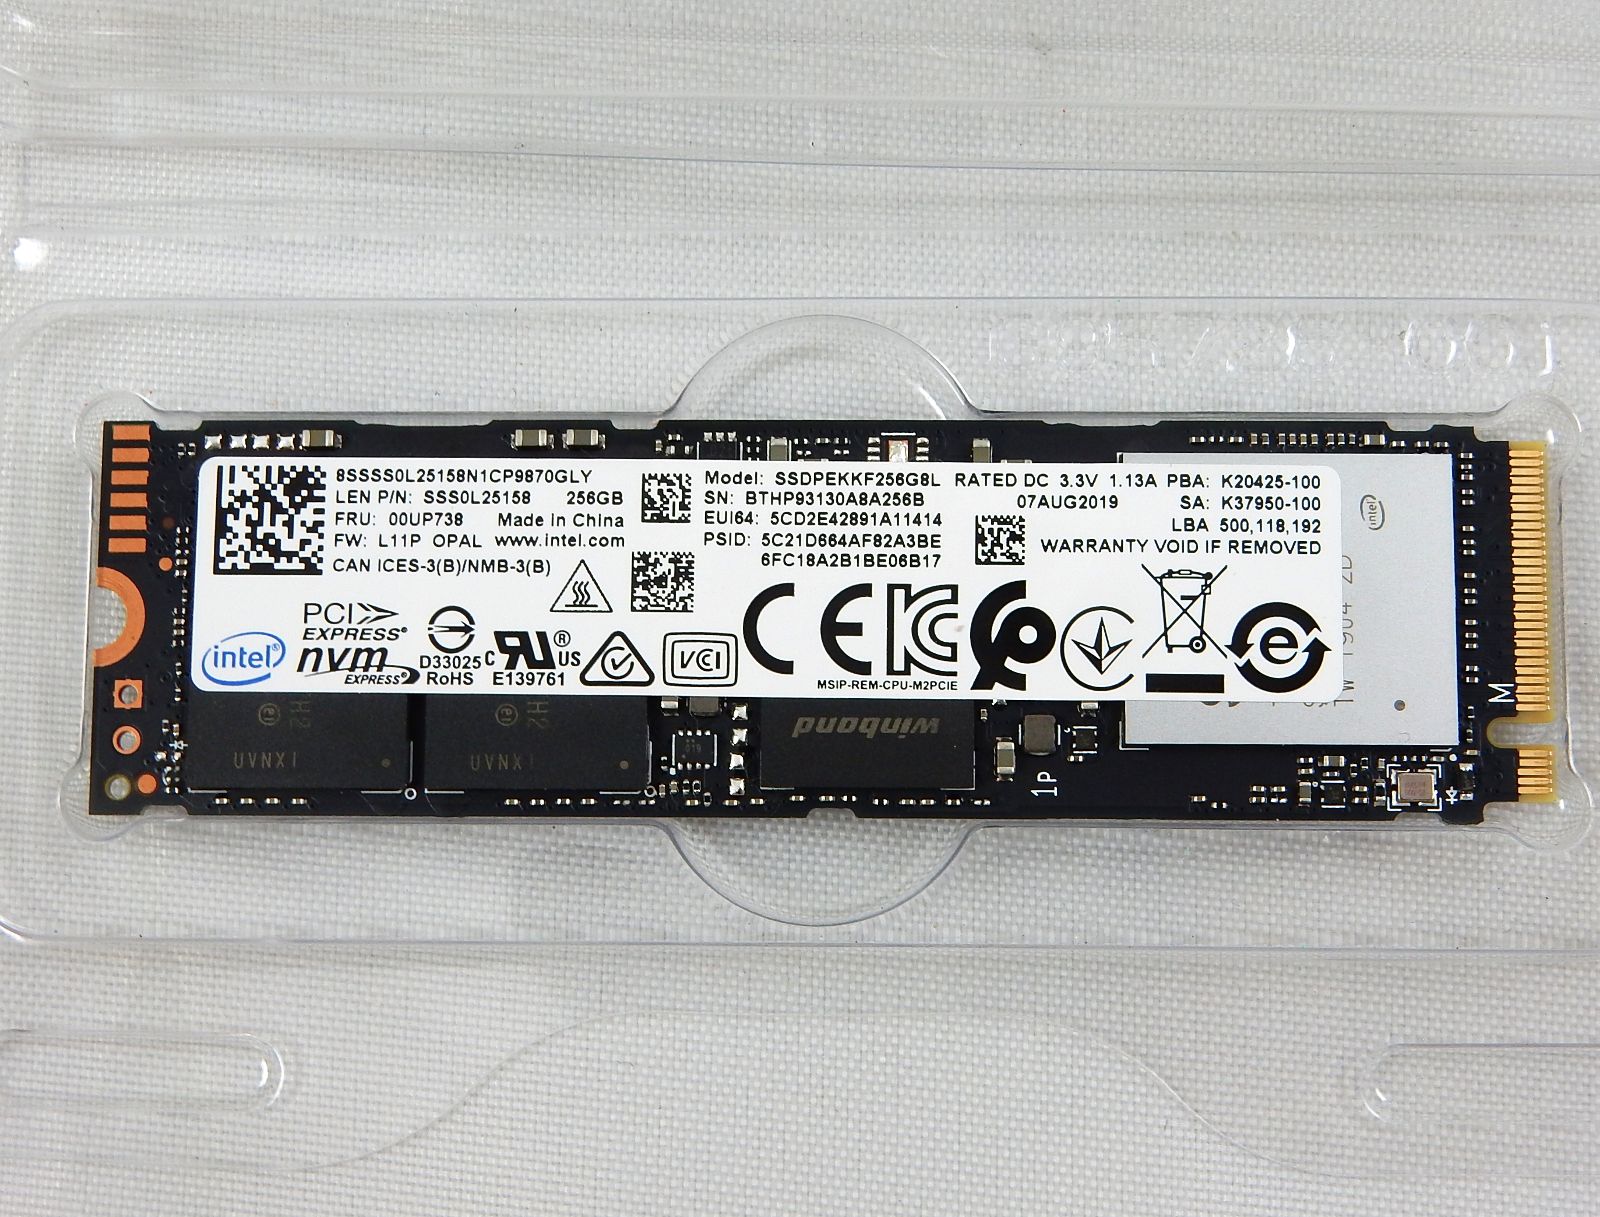 INTEL SSD Pro 7600p 256GB M.2 NVMe PCIe-x4 Solid State Drive